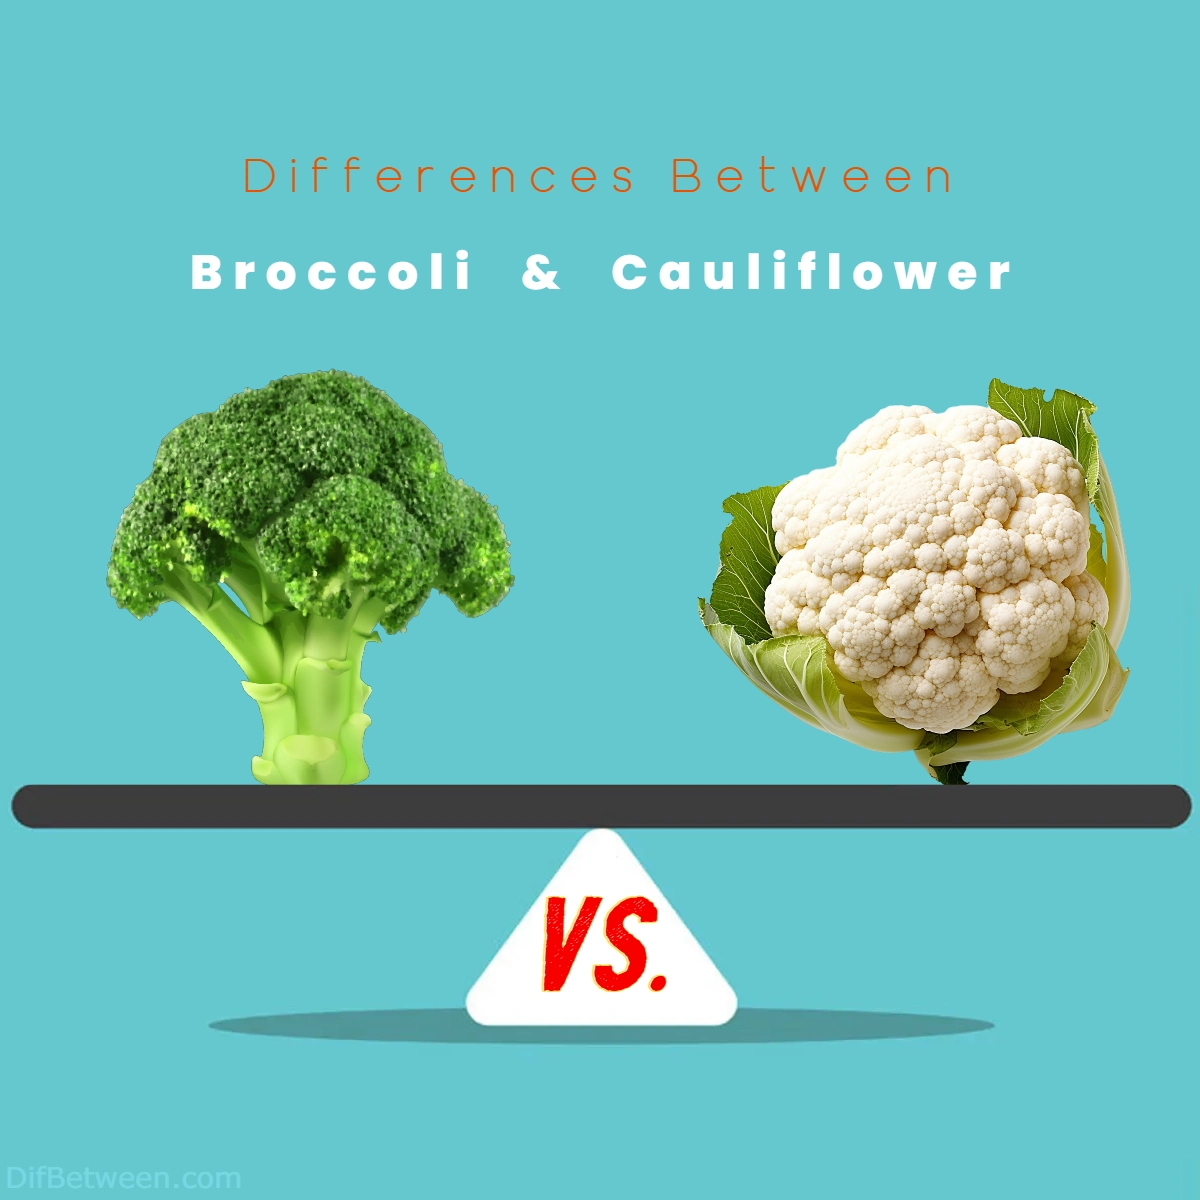 Difference Between Broccoli and Cauliflower